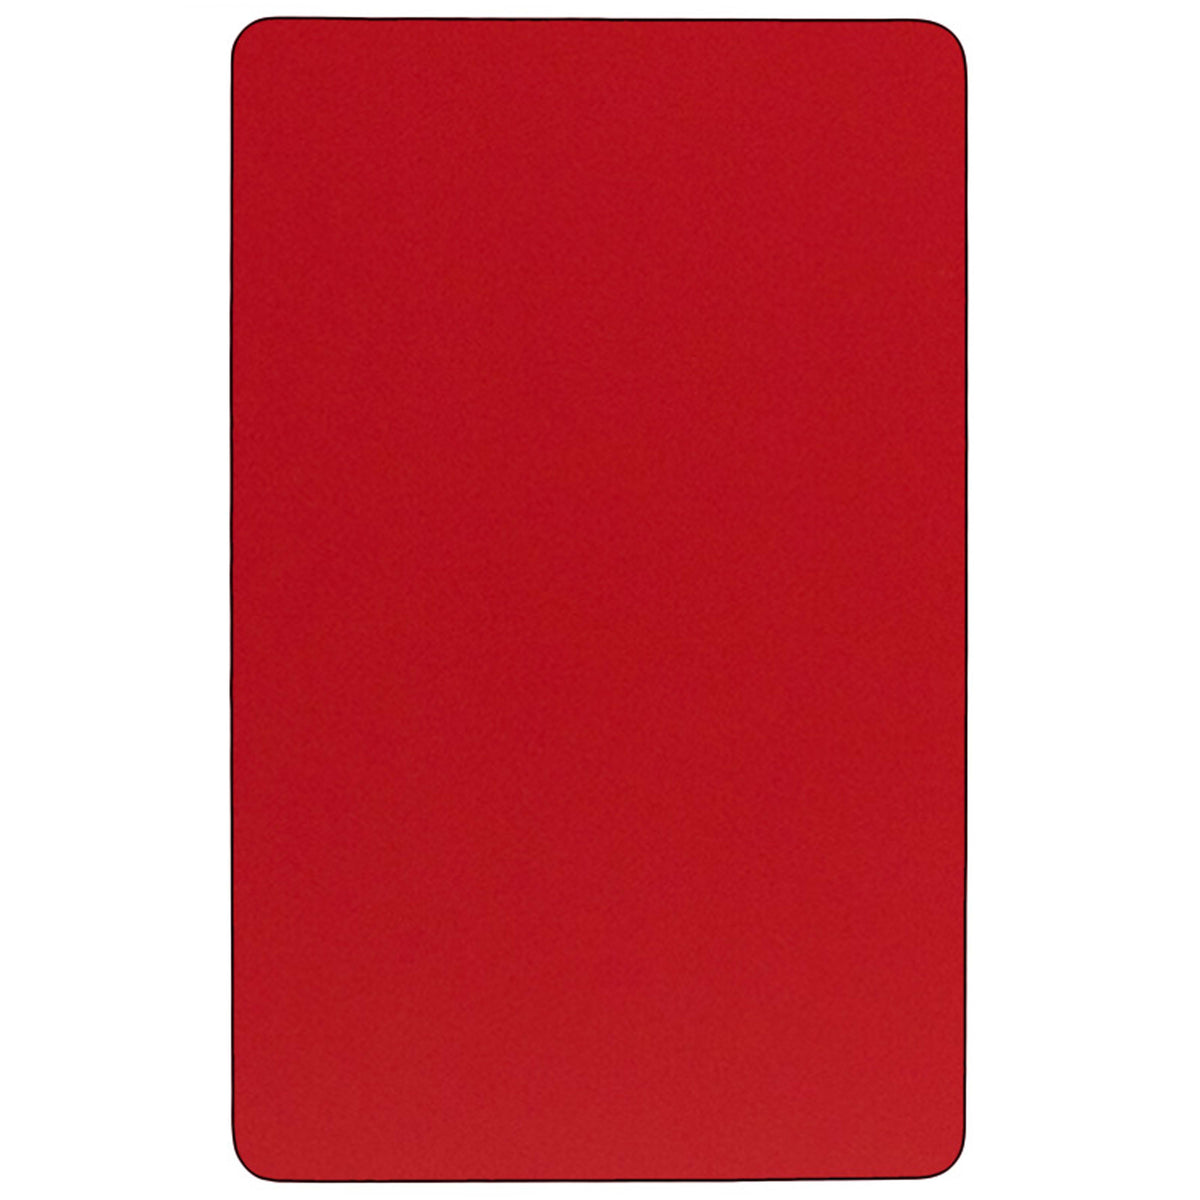 Red |#| 36inchW x 72inchL Rectangular Red HP Laminate Activity Table - Height Adjustable Legs